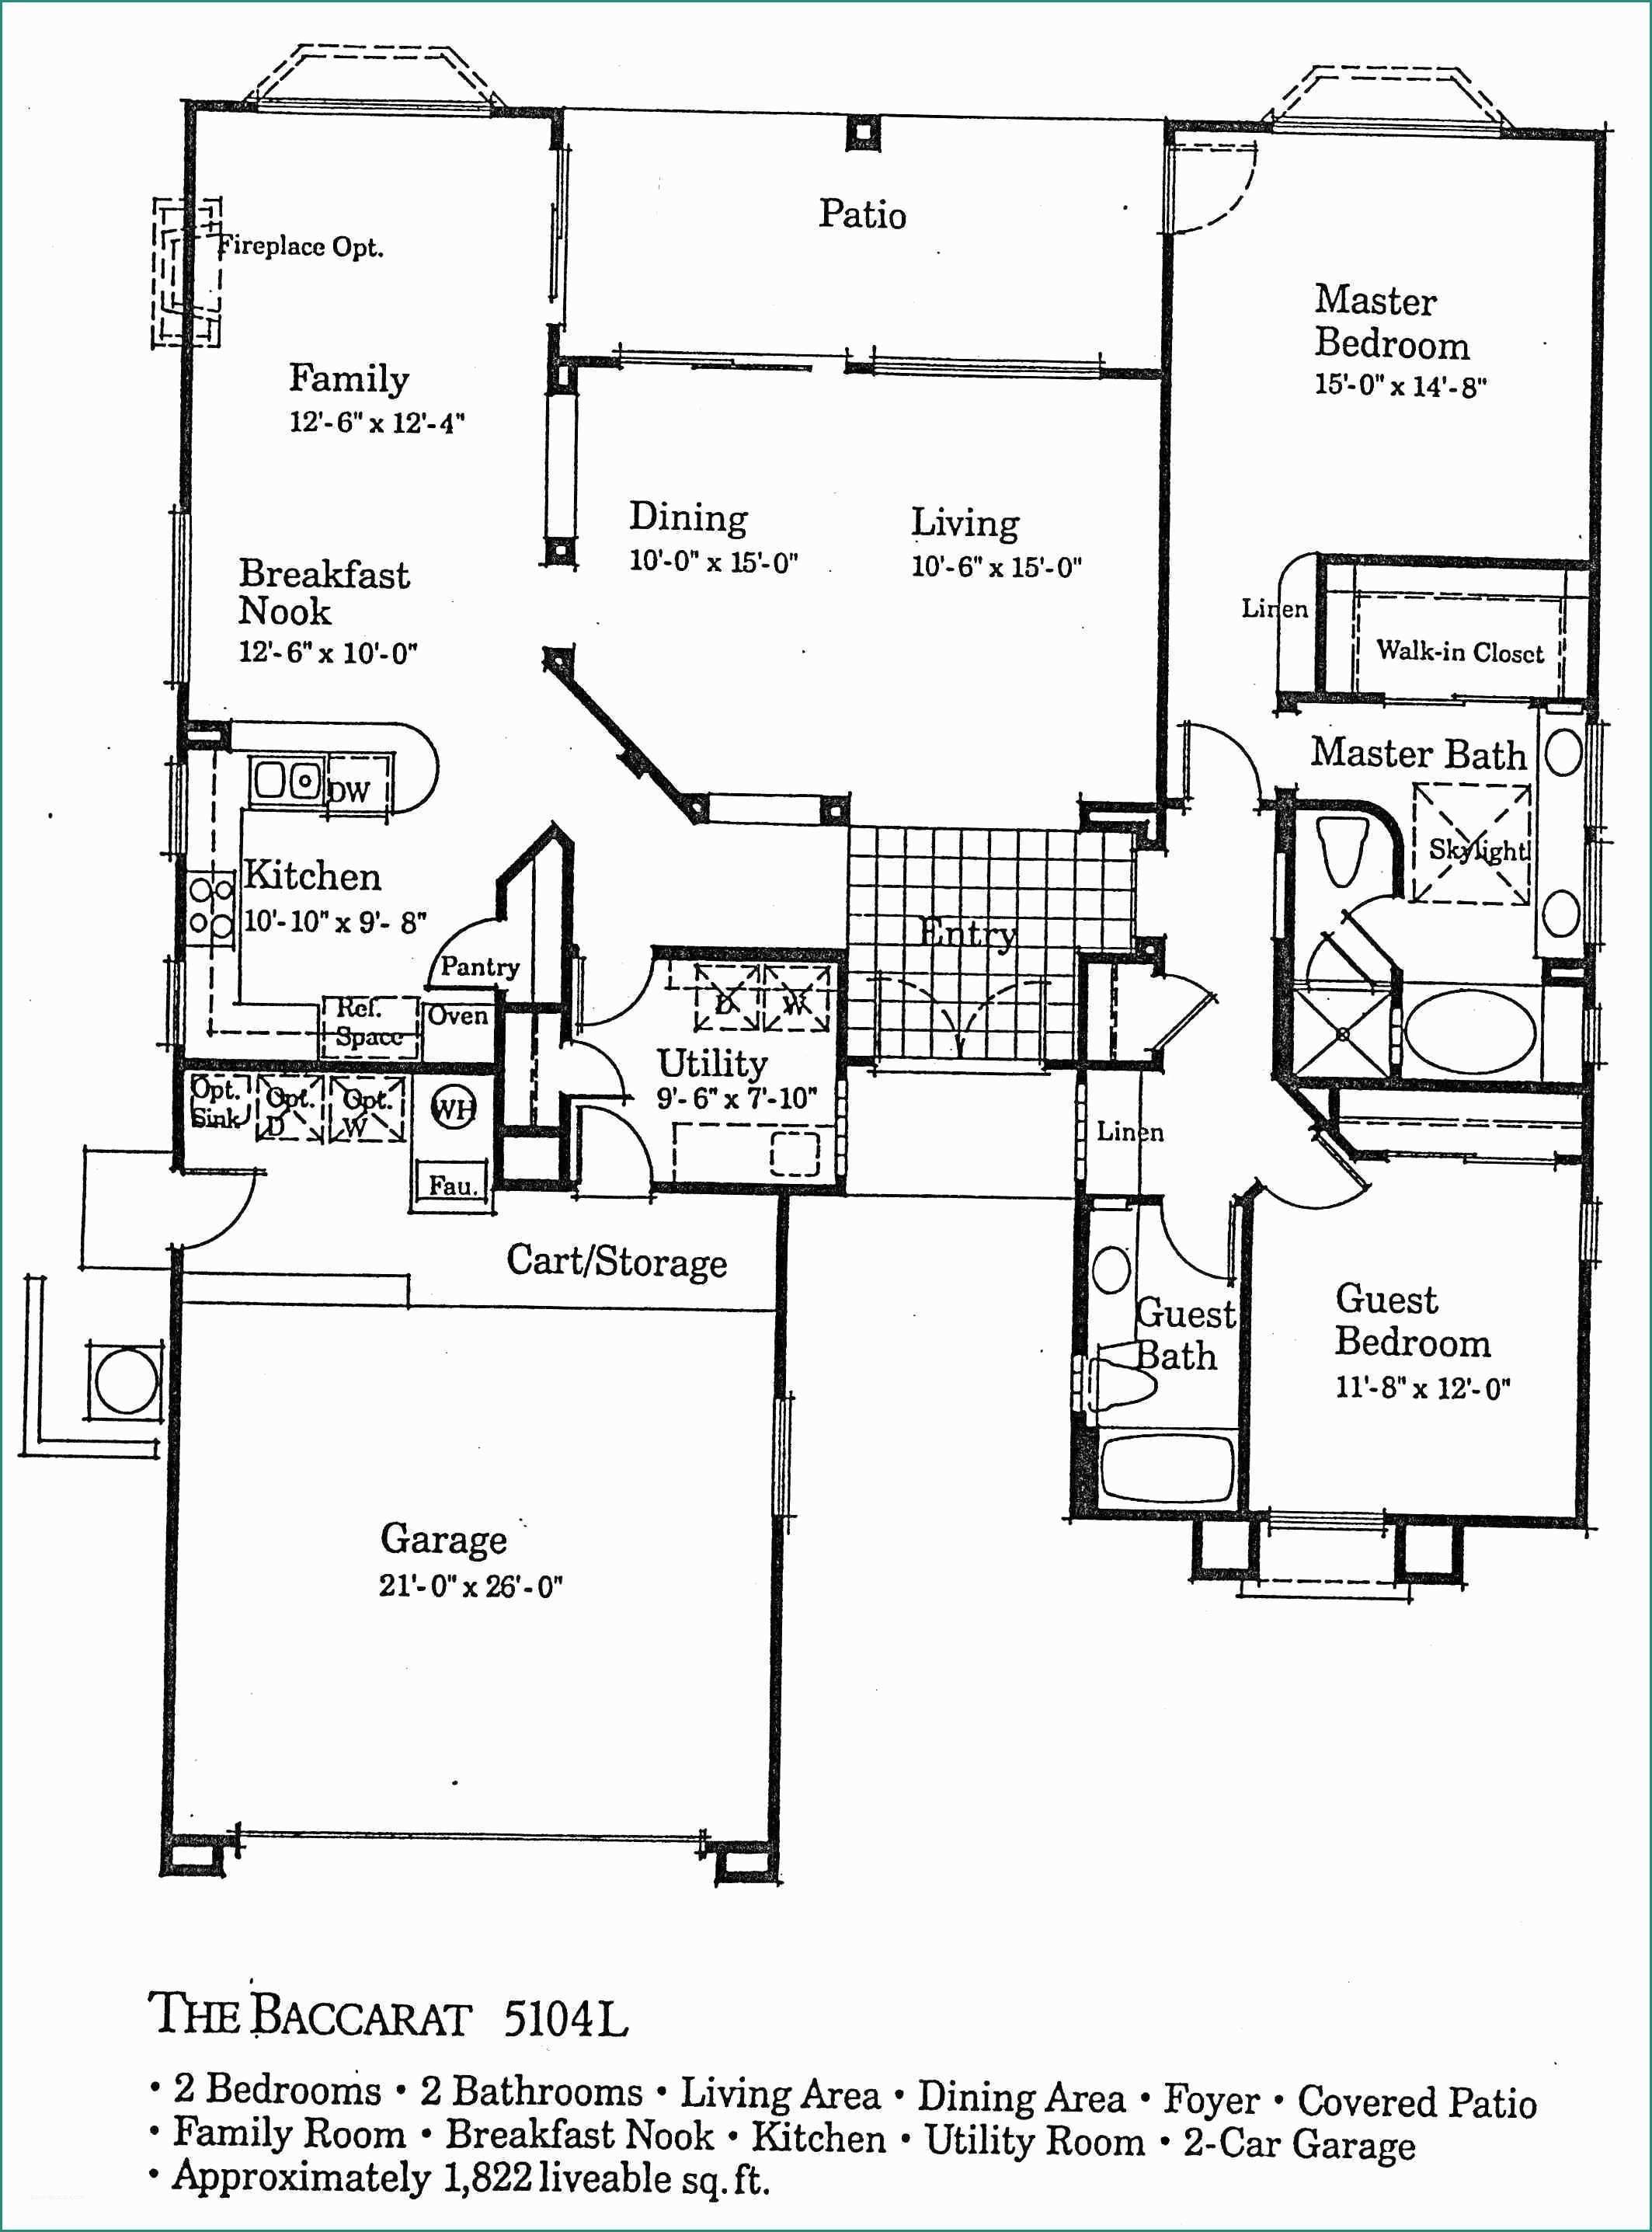 Vienna Bampb E Small Guest House Plans Beautiful Best Guest House Plans Free or